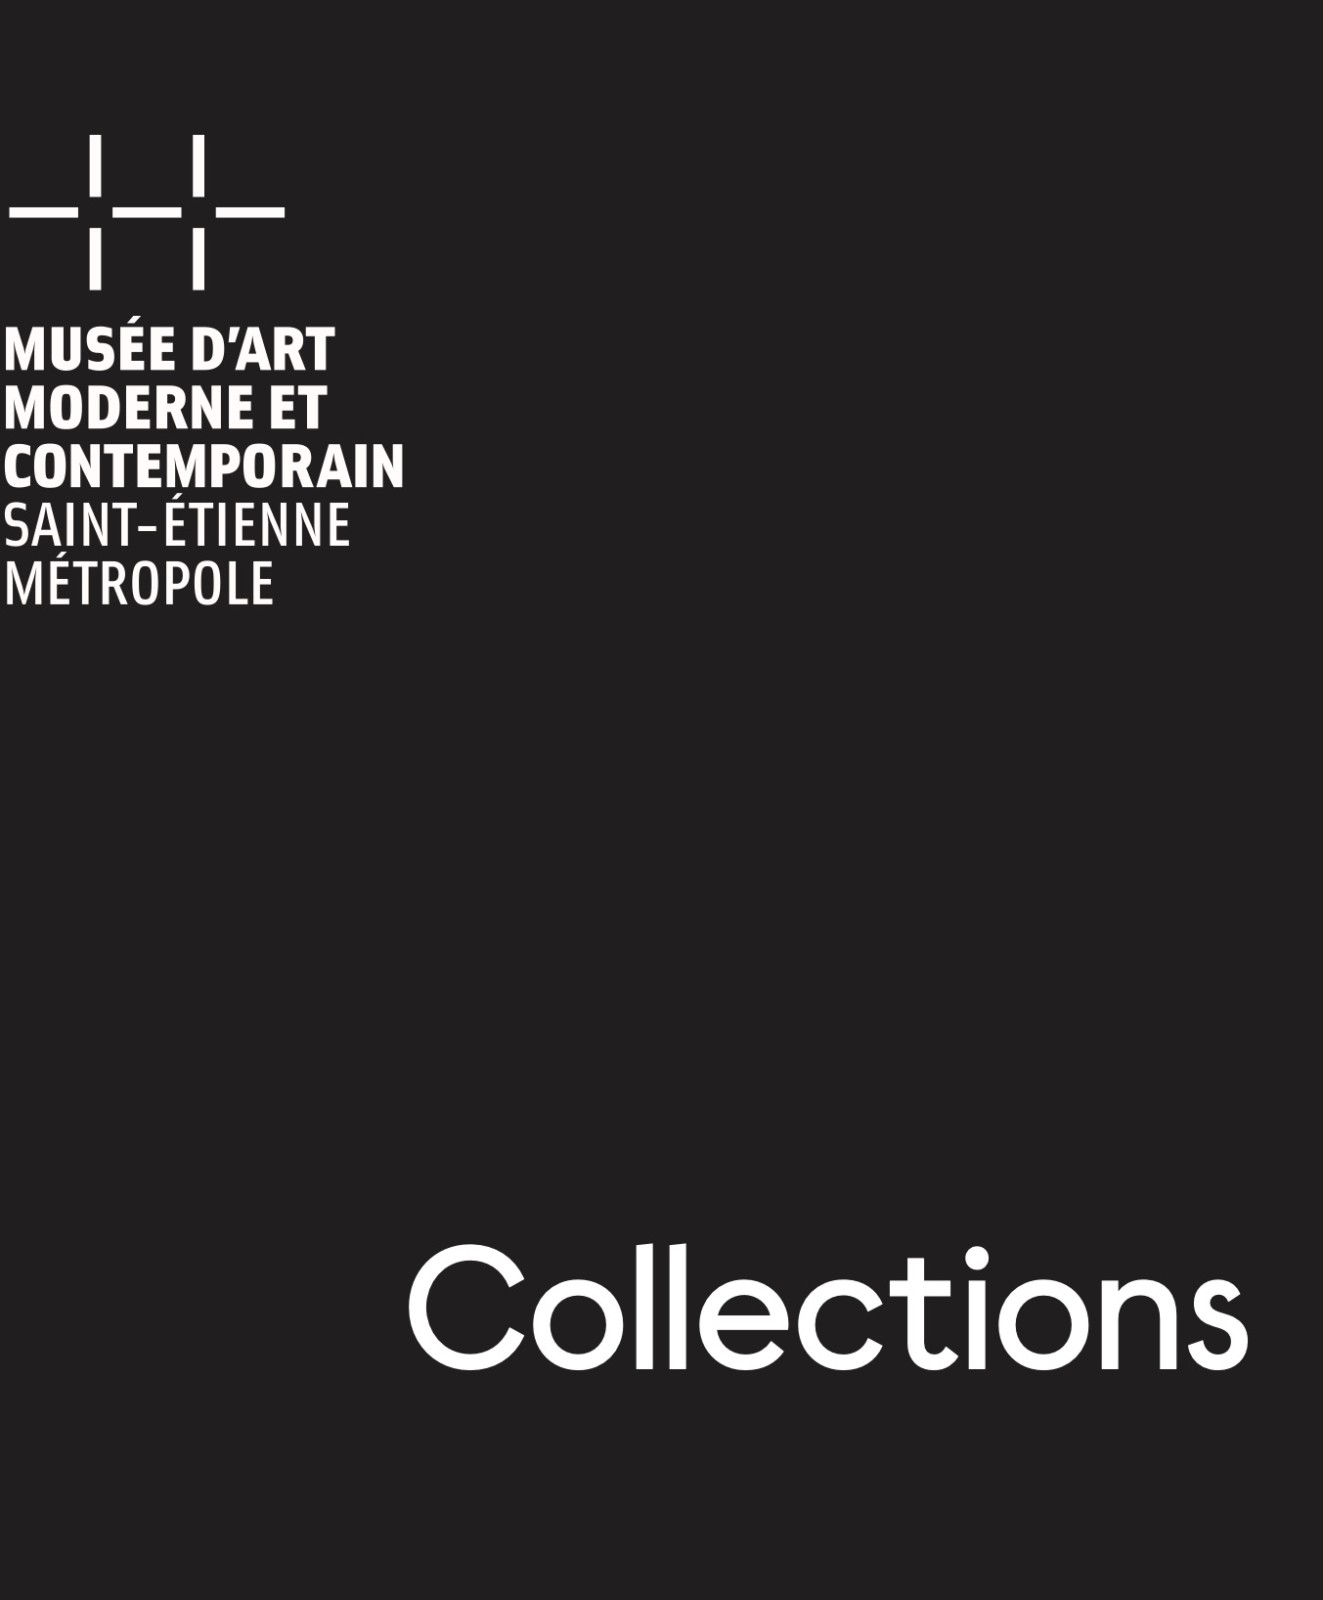 In Saint-Étienne, the rich collection of the MAMC+